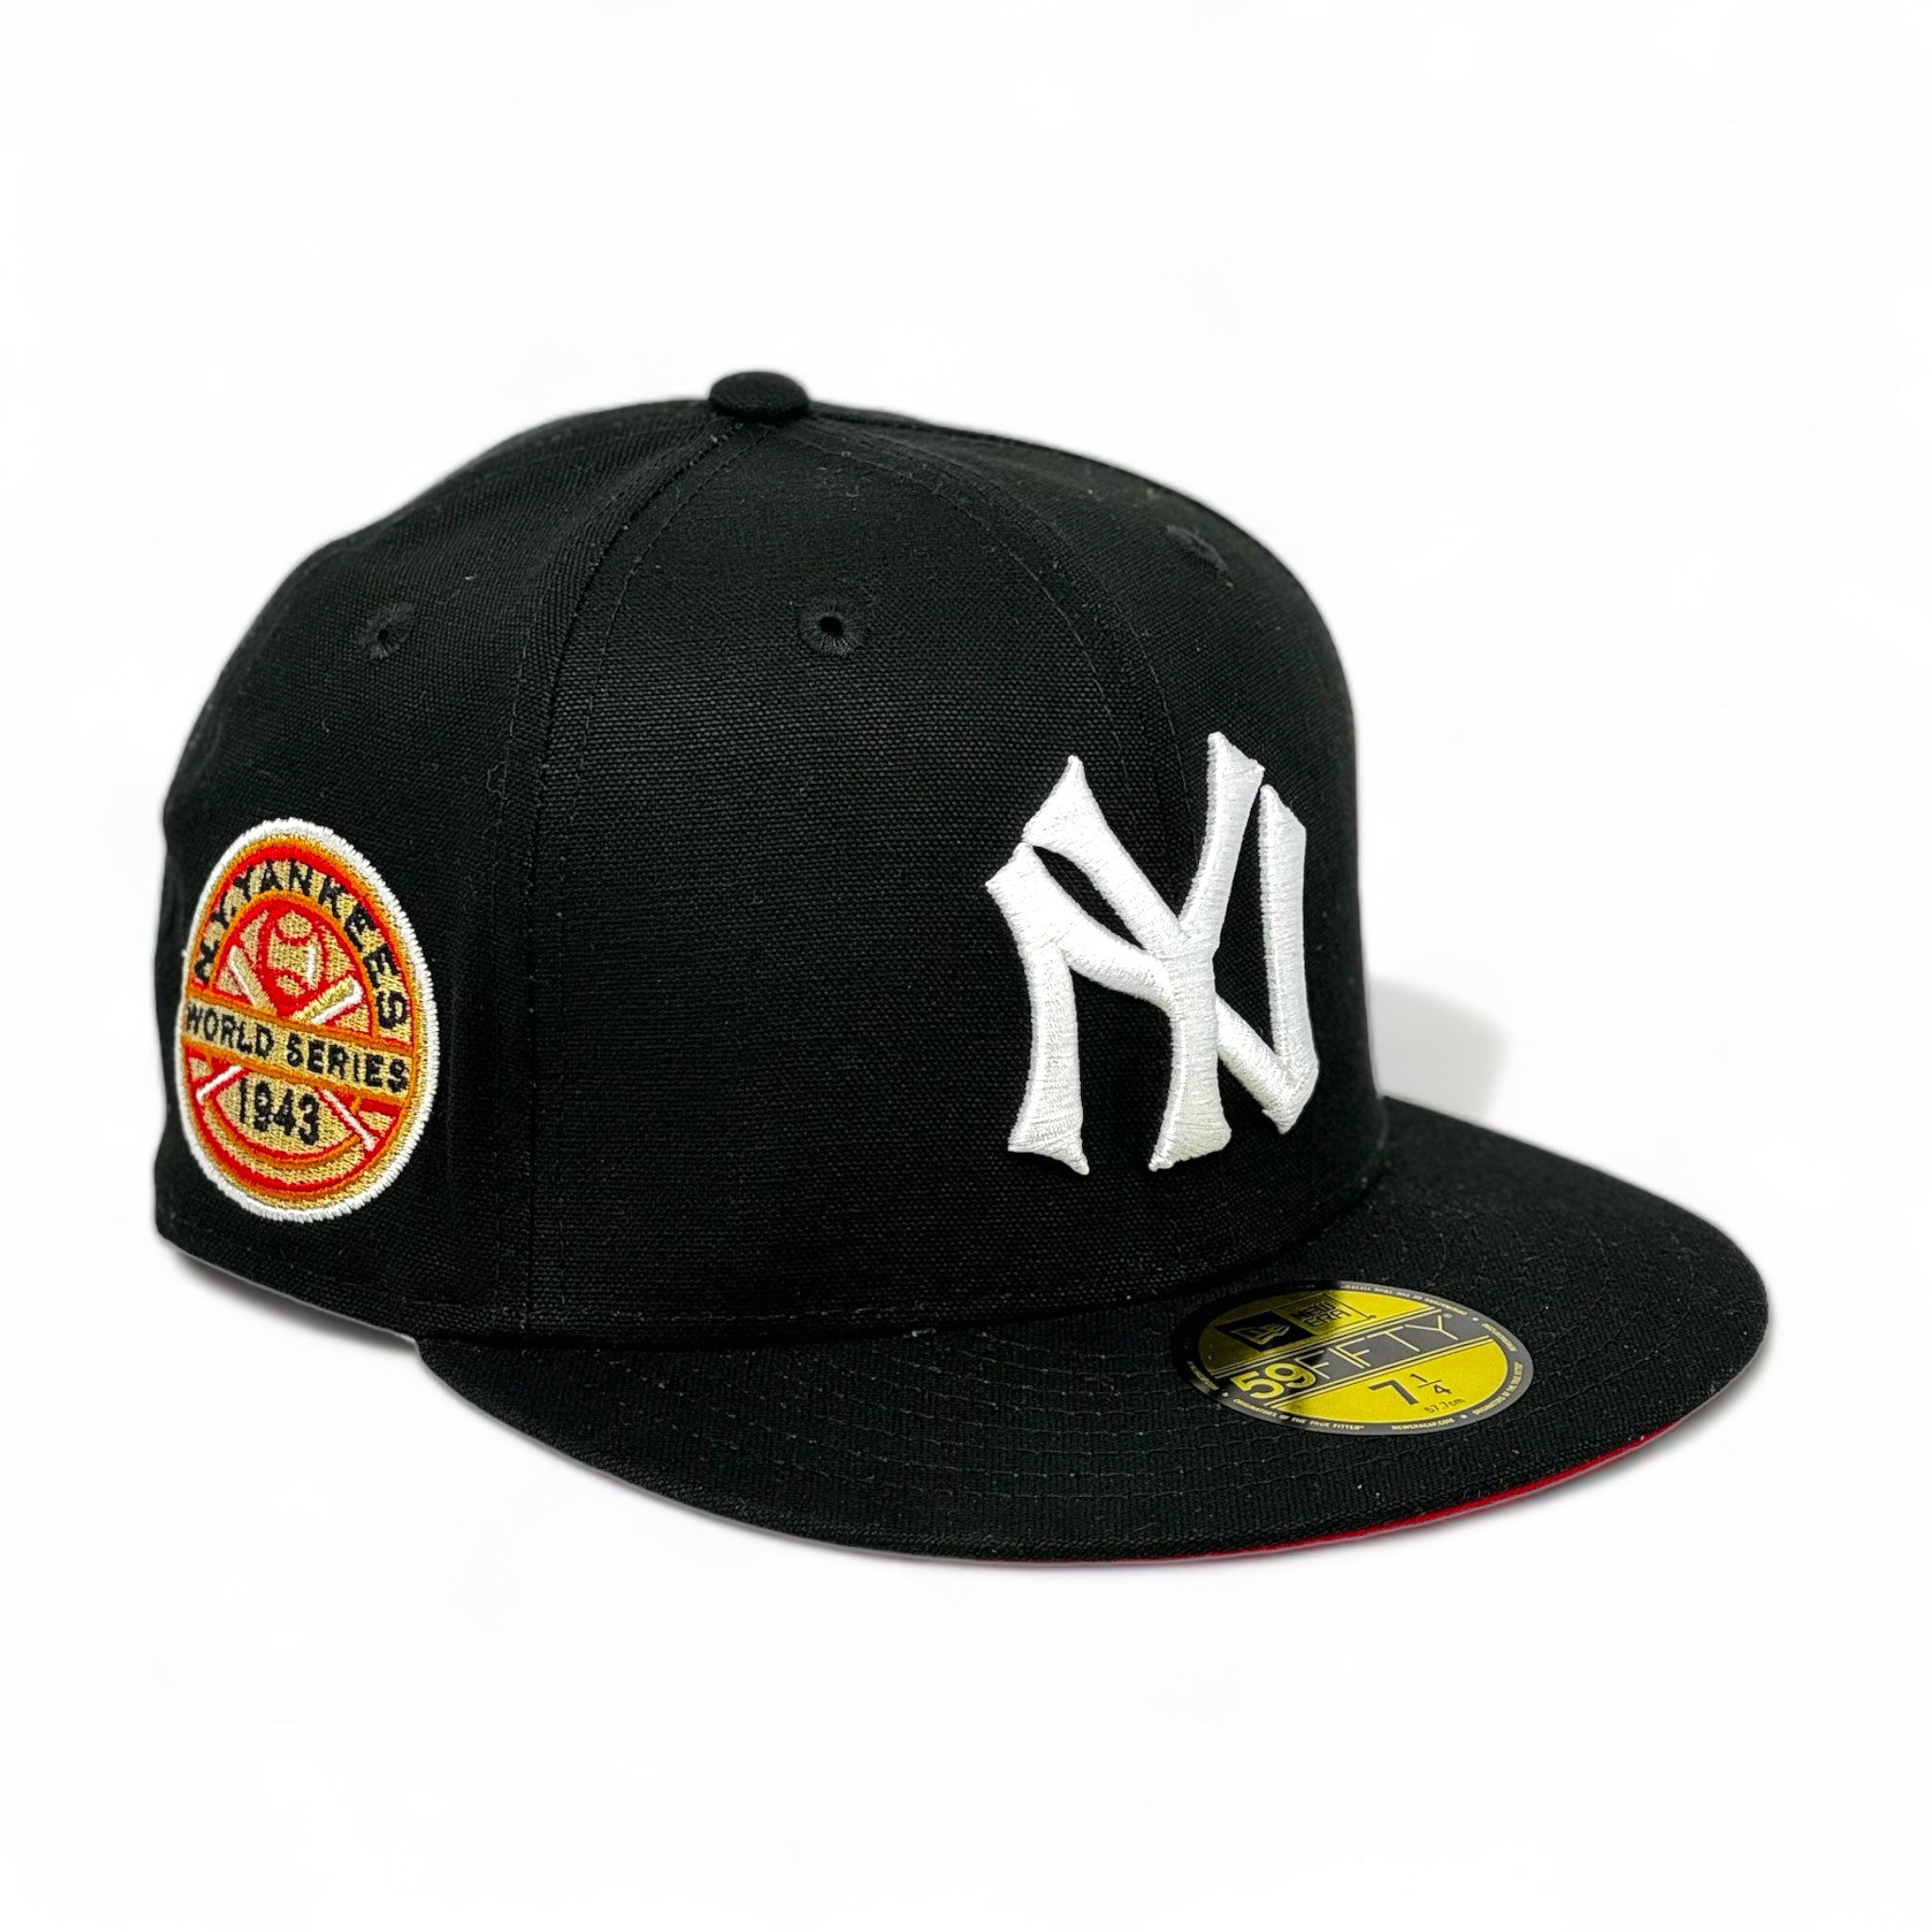 NEW YORK YANKEES (BLACK) (1943 WORLD SERIES) NEW ERA 59FIFTY FITTED (RED UNDER VISOR)